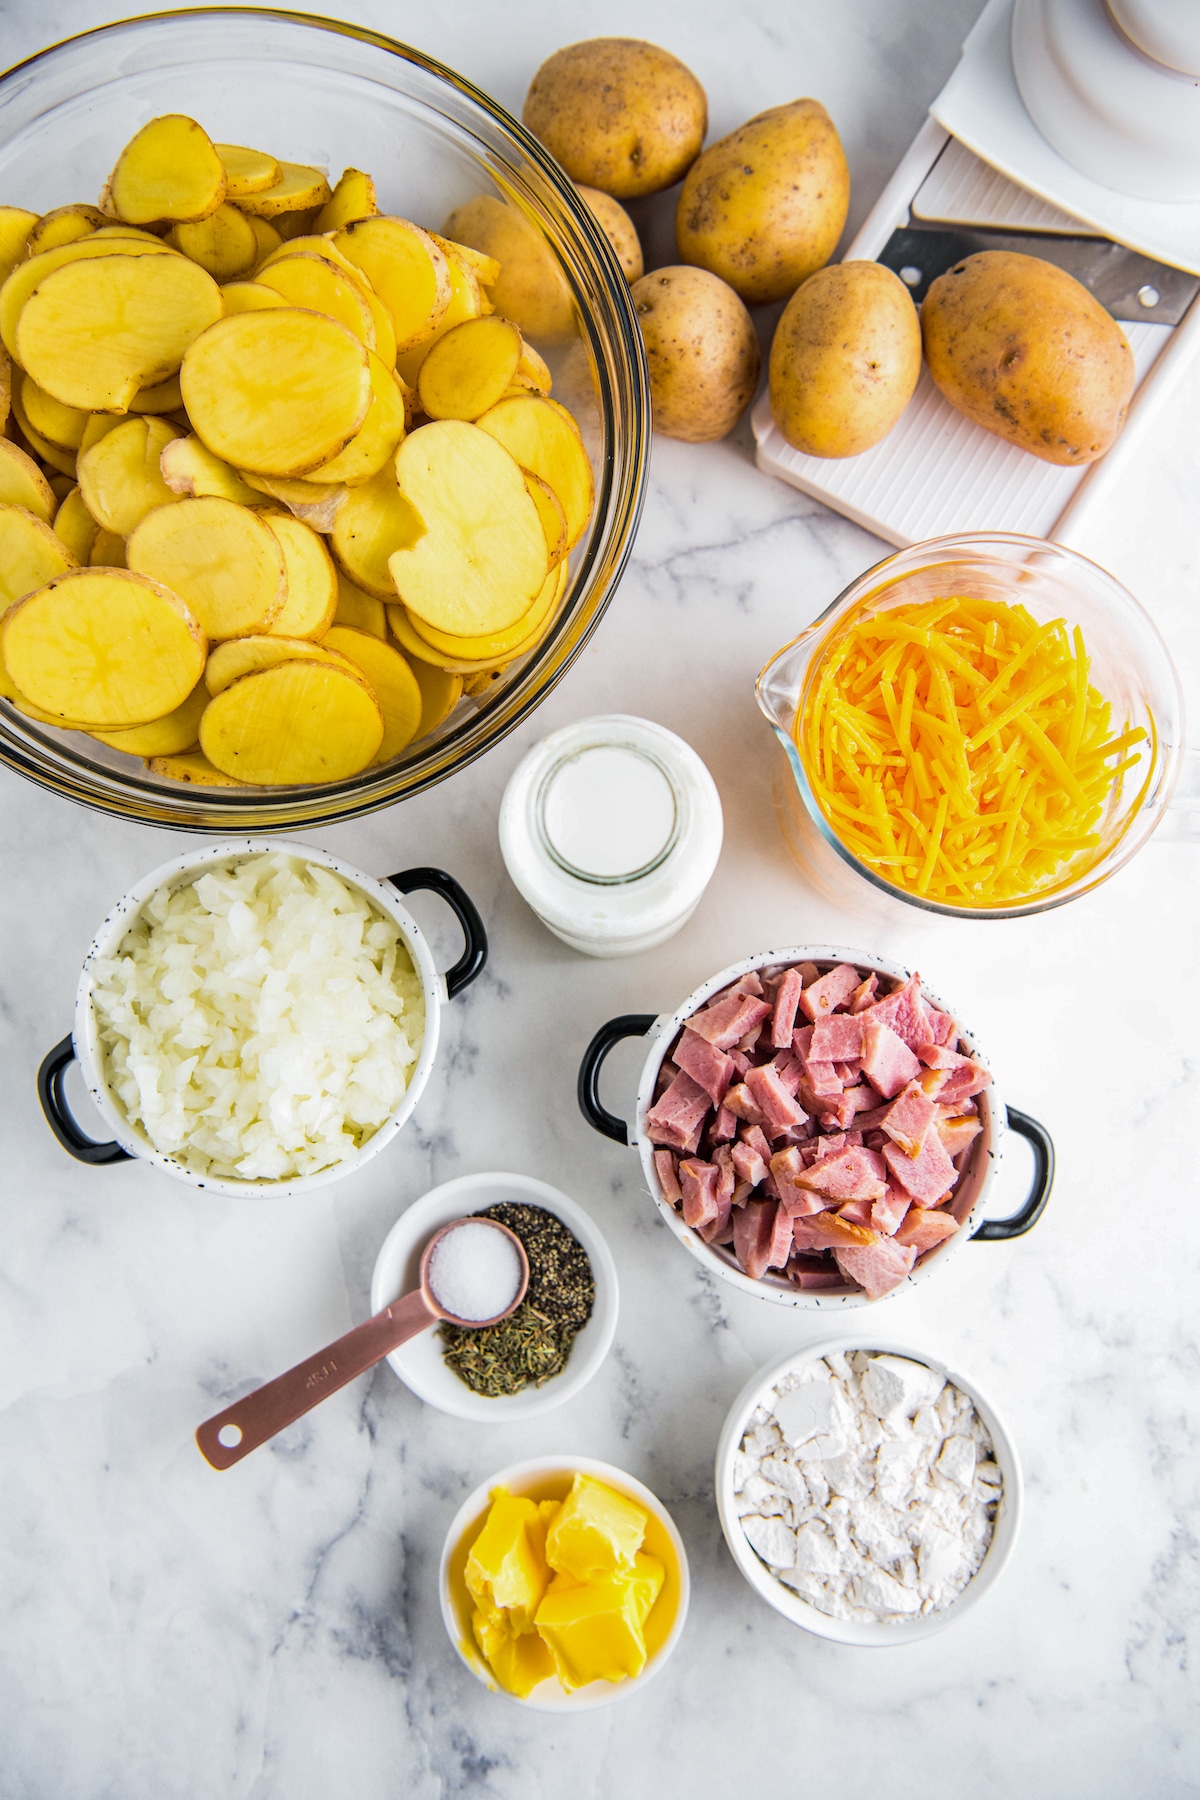 Ingredients for a casserole arranged on a marble countertop with bowls.